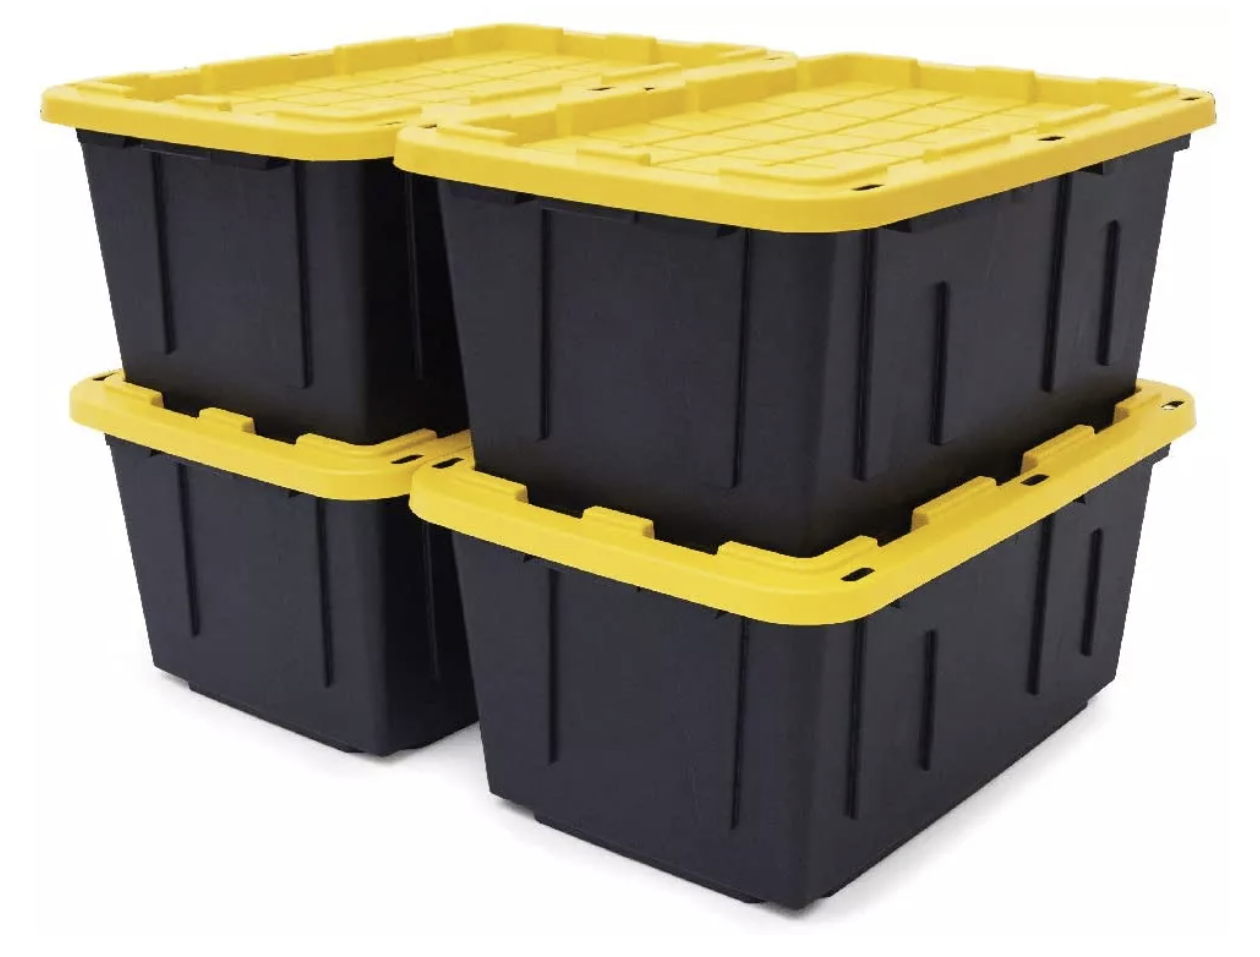 A stack of black and yellow storage containers

Description automatically generated